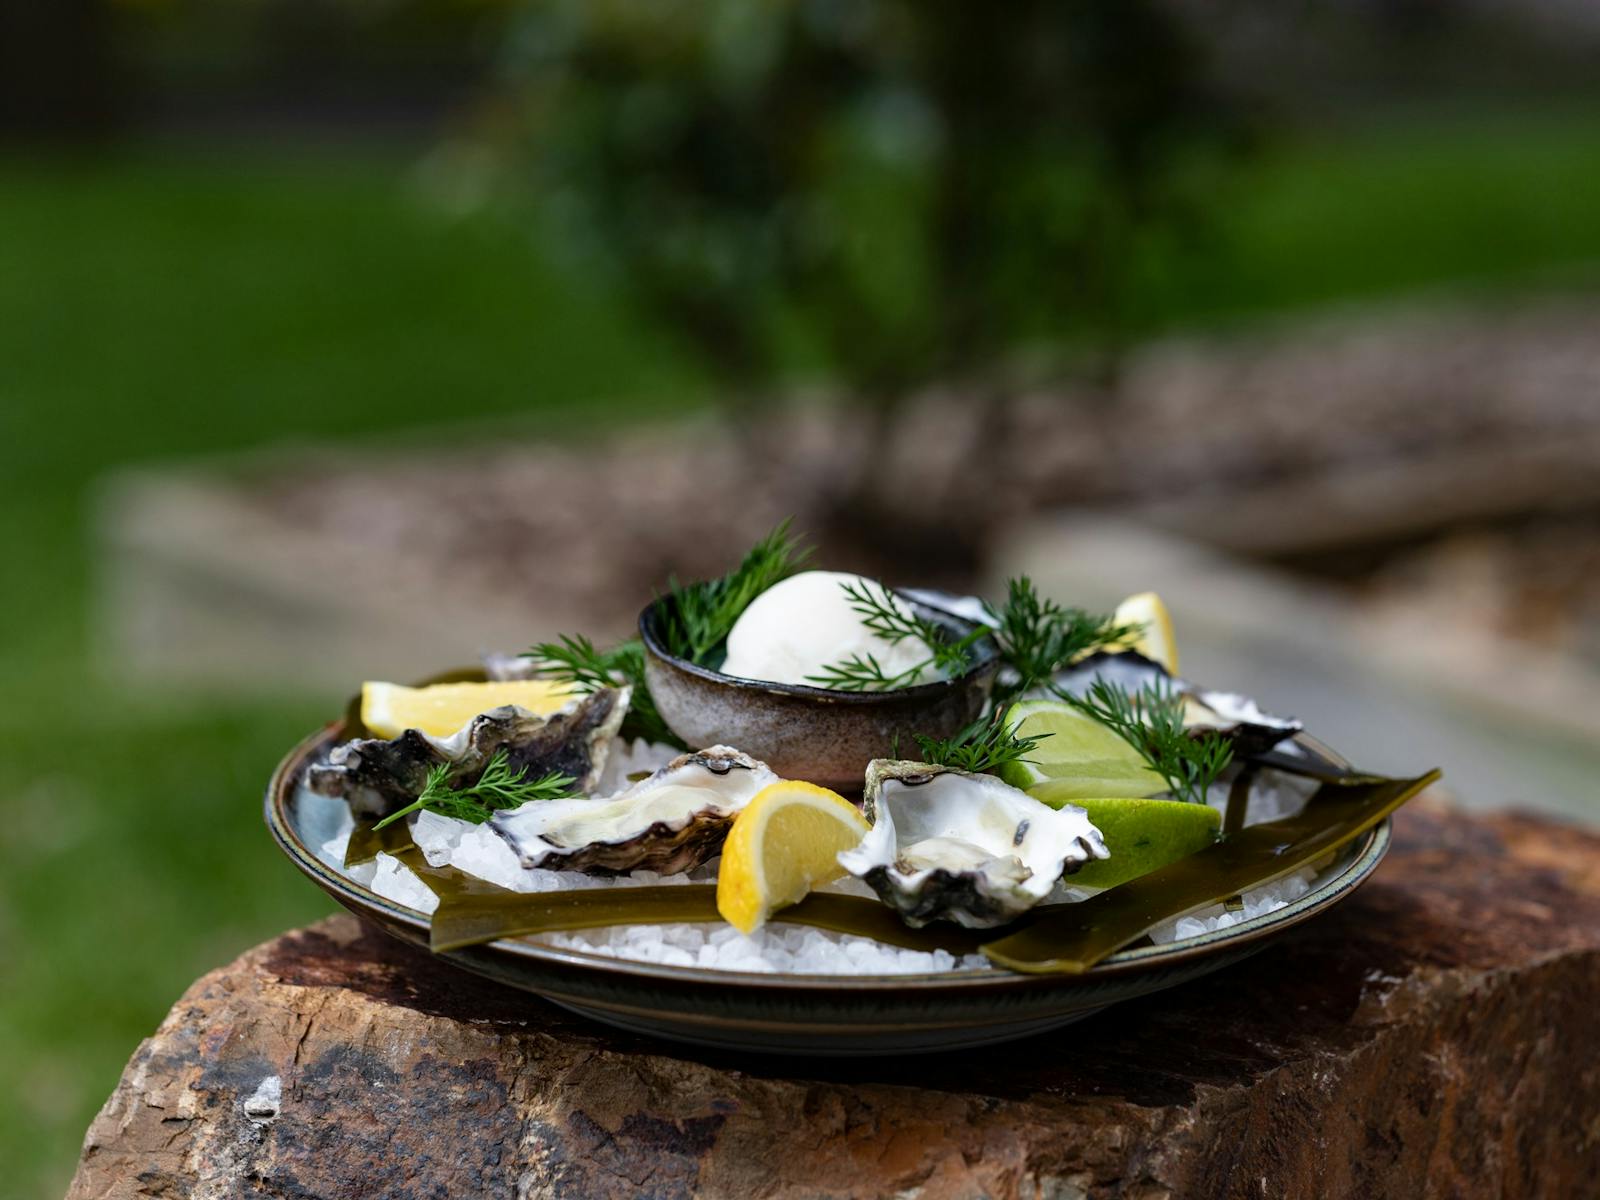 A plate of oysters with lemon wedges and homemade sorbet on a wooden stump